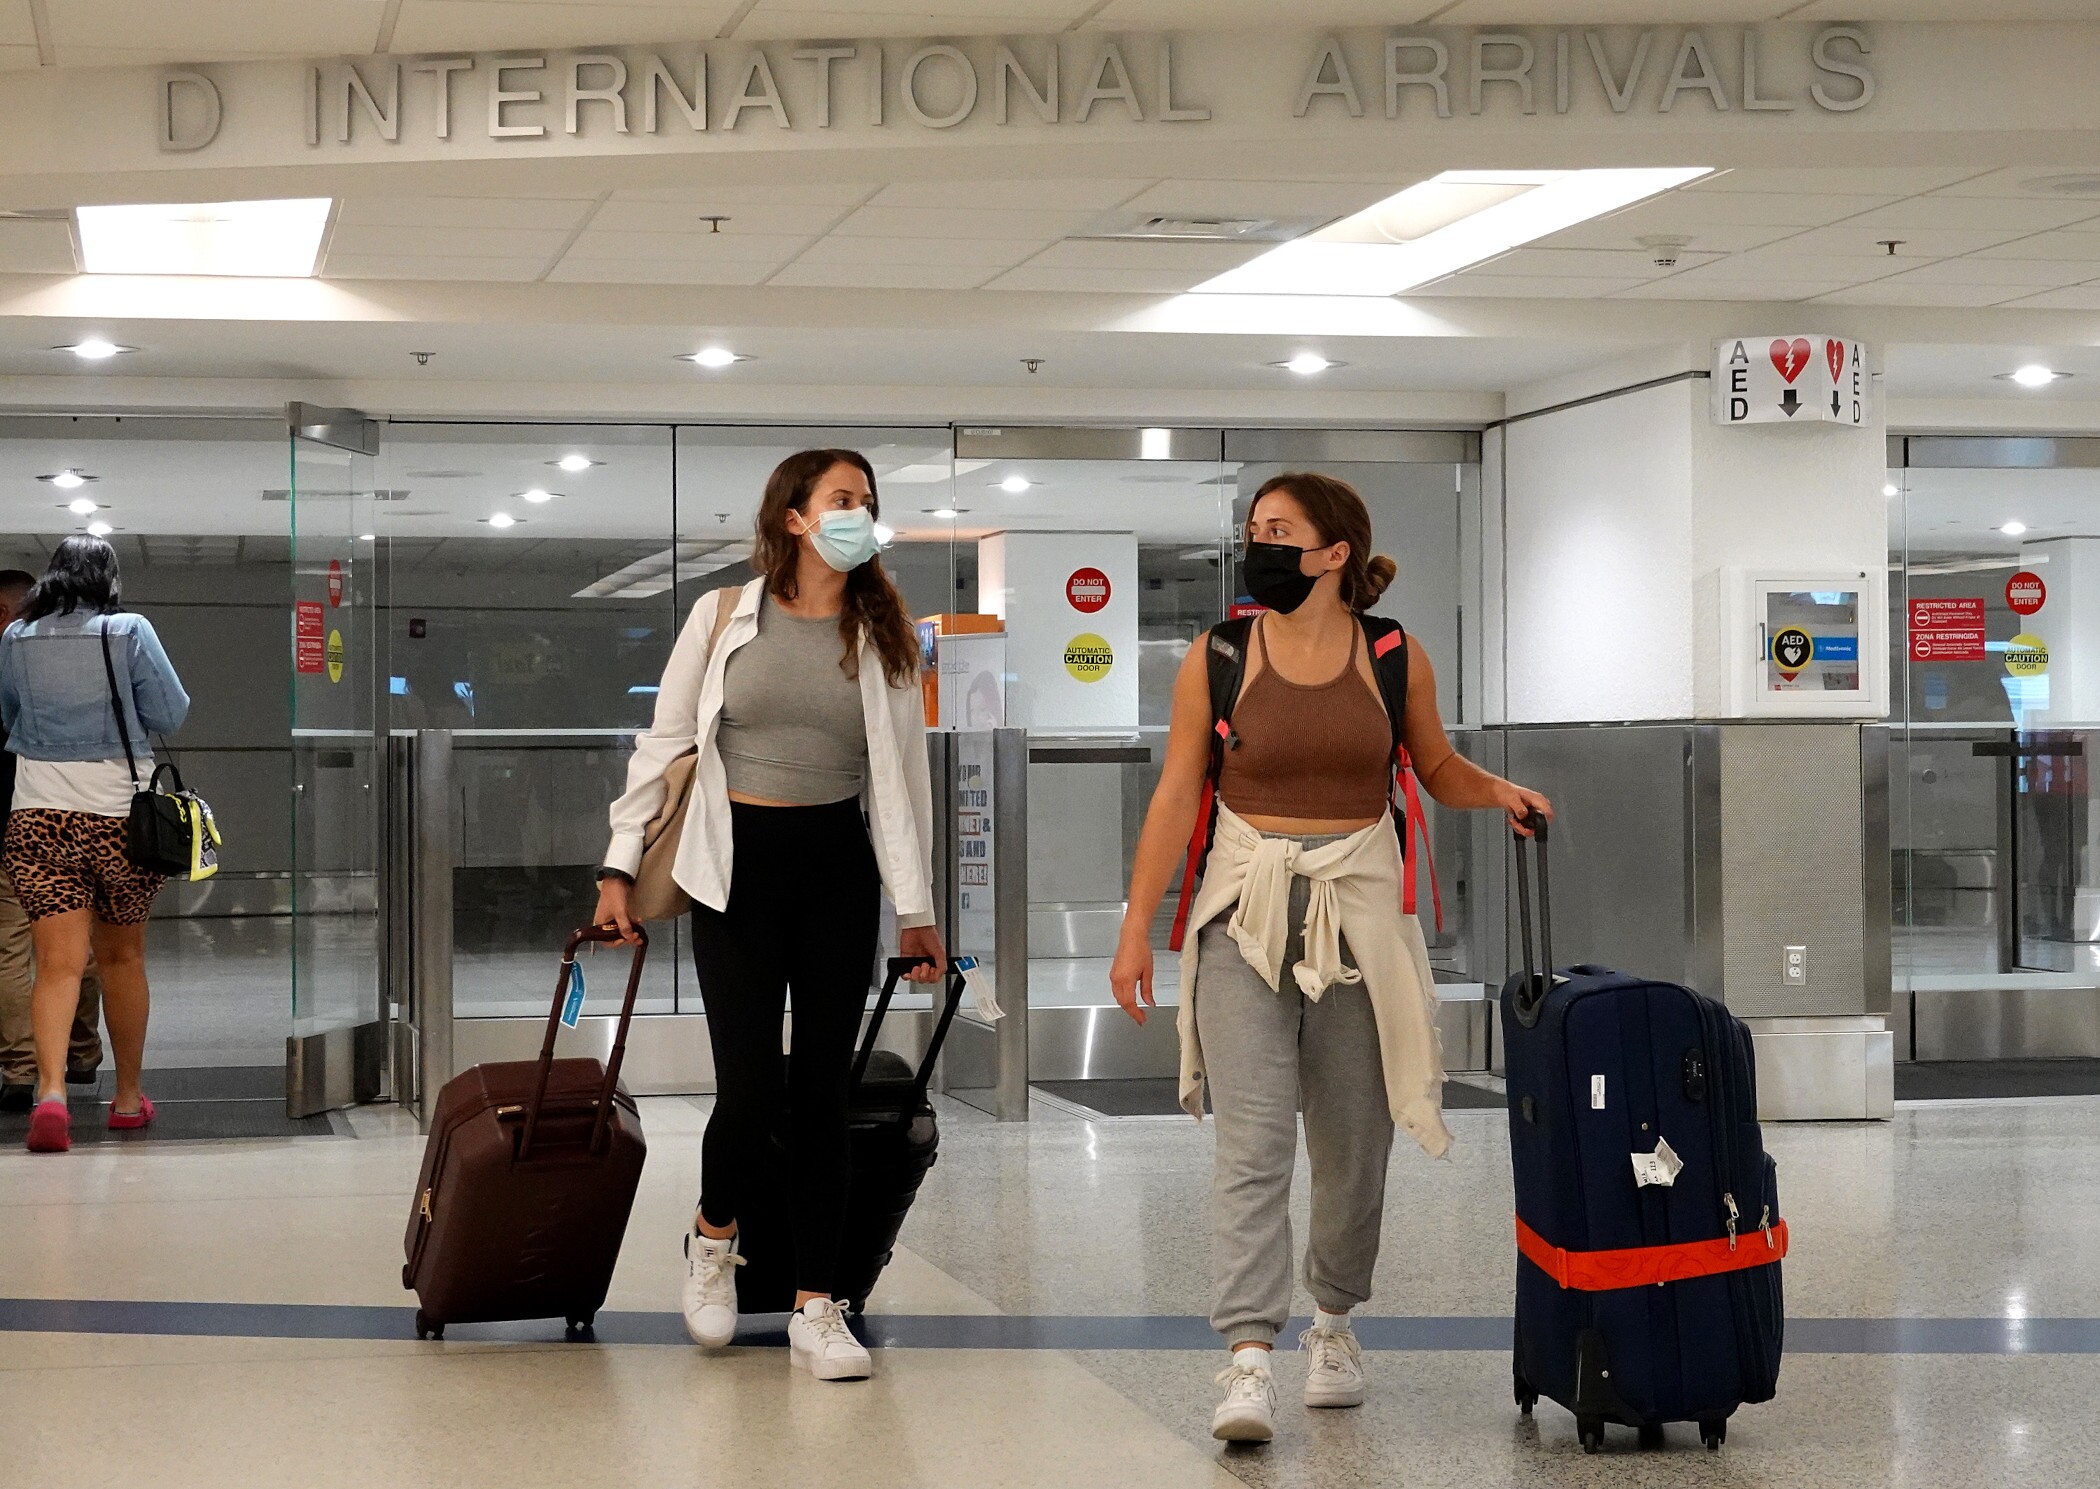 American travelers are once again eager to visit other countries, with more Americans traveling abroad in the first three months of this year than in the comparable period in 2019. (Getty Images)